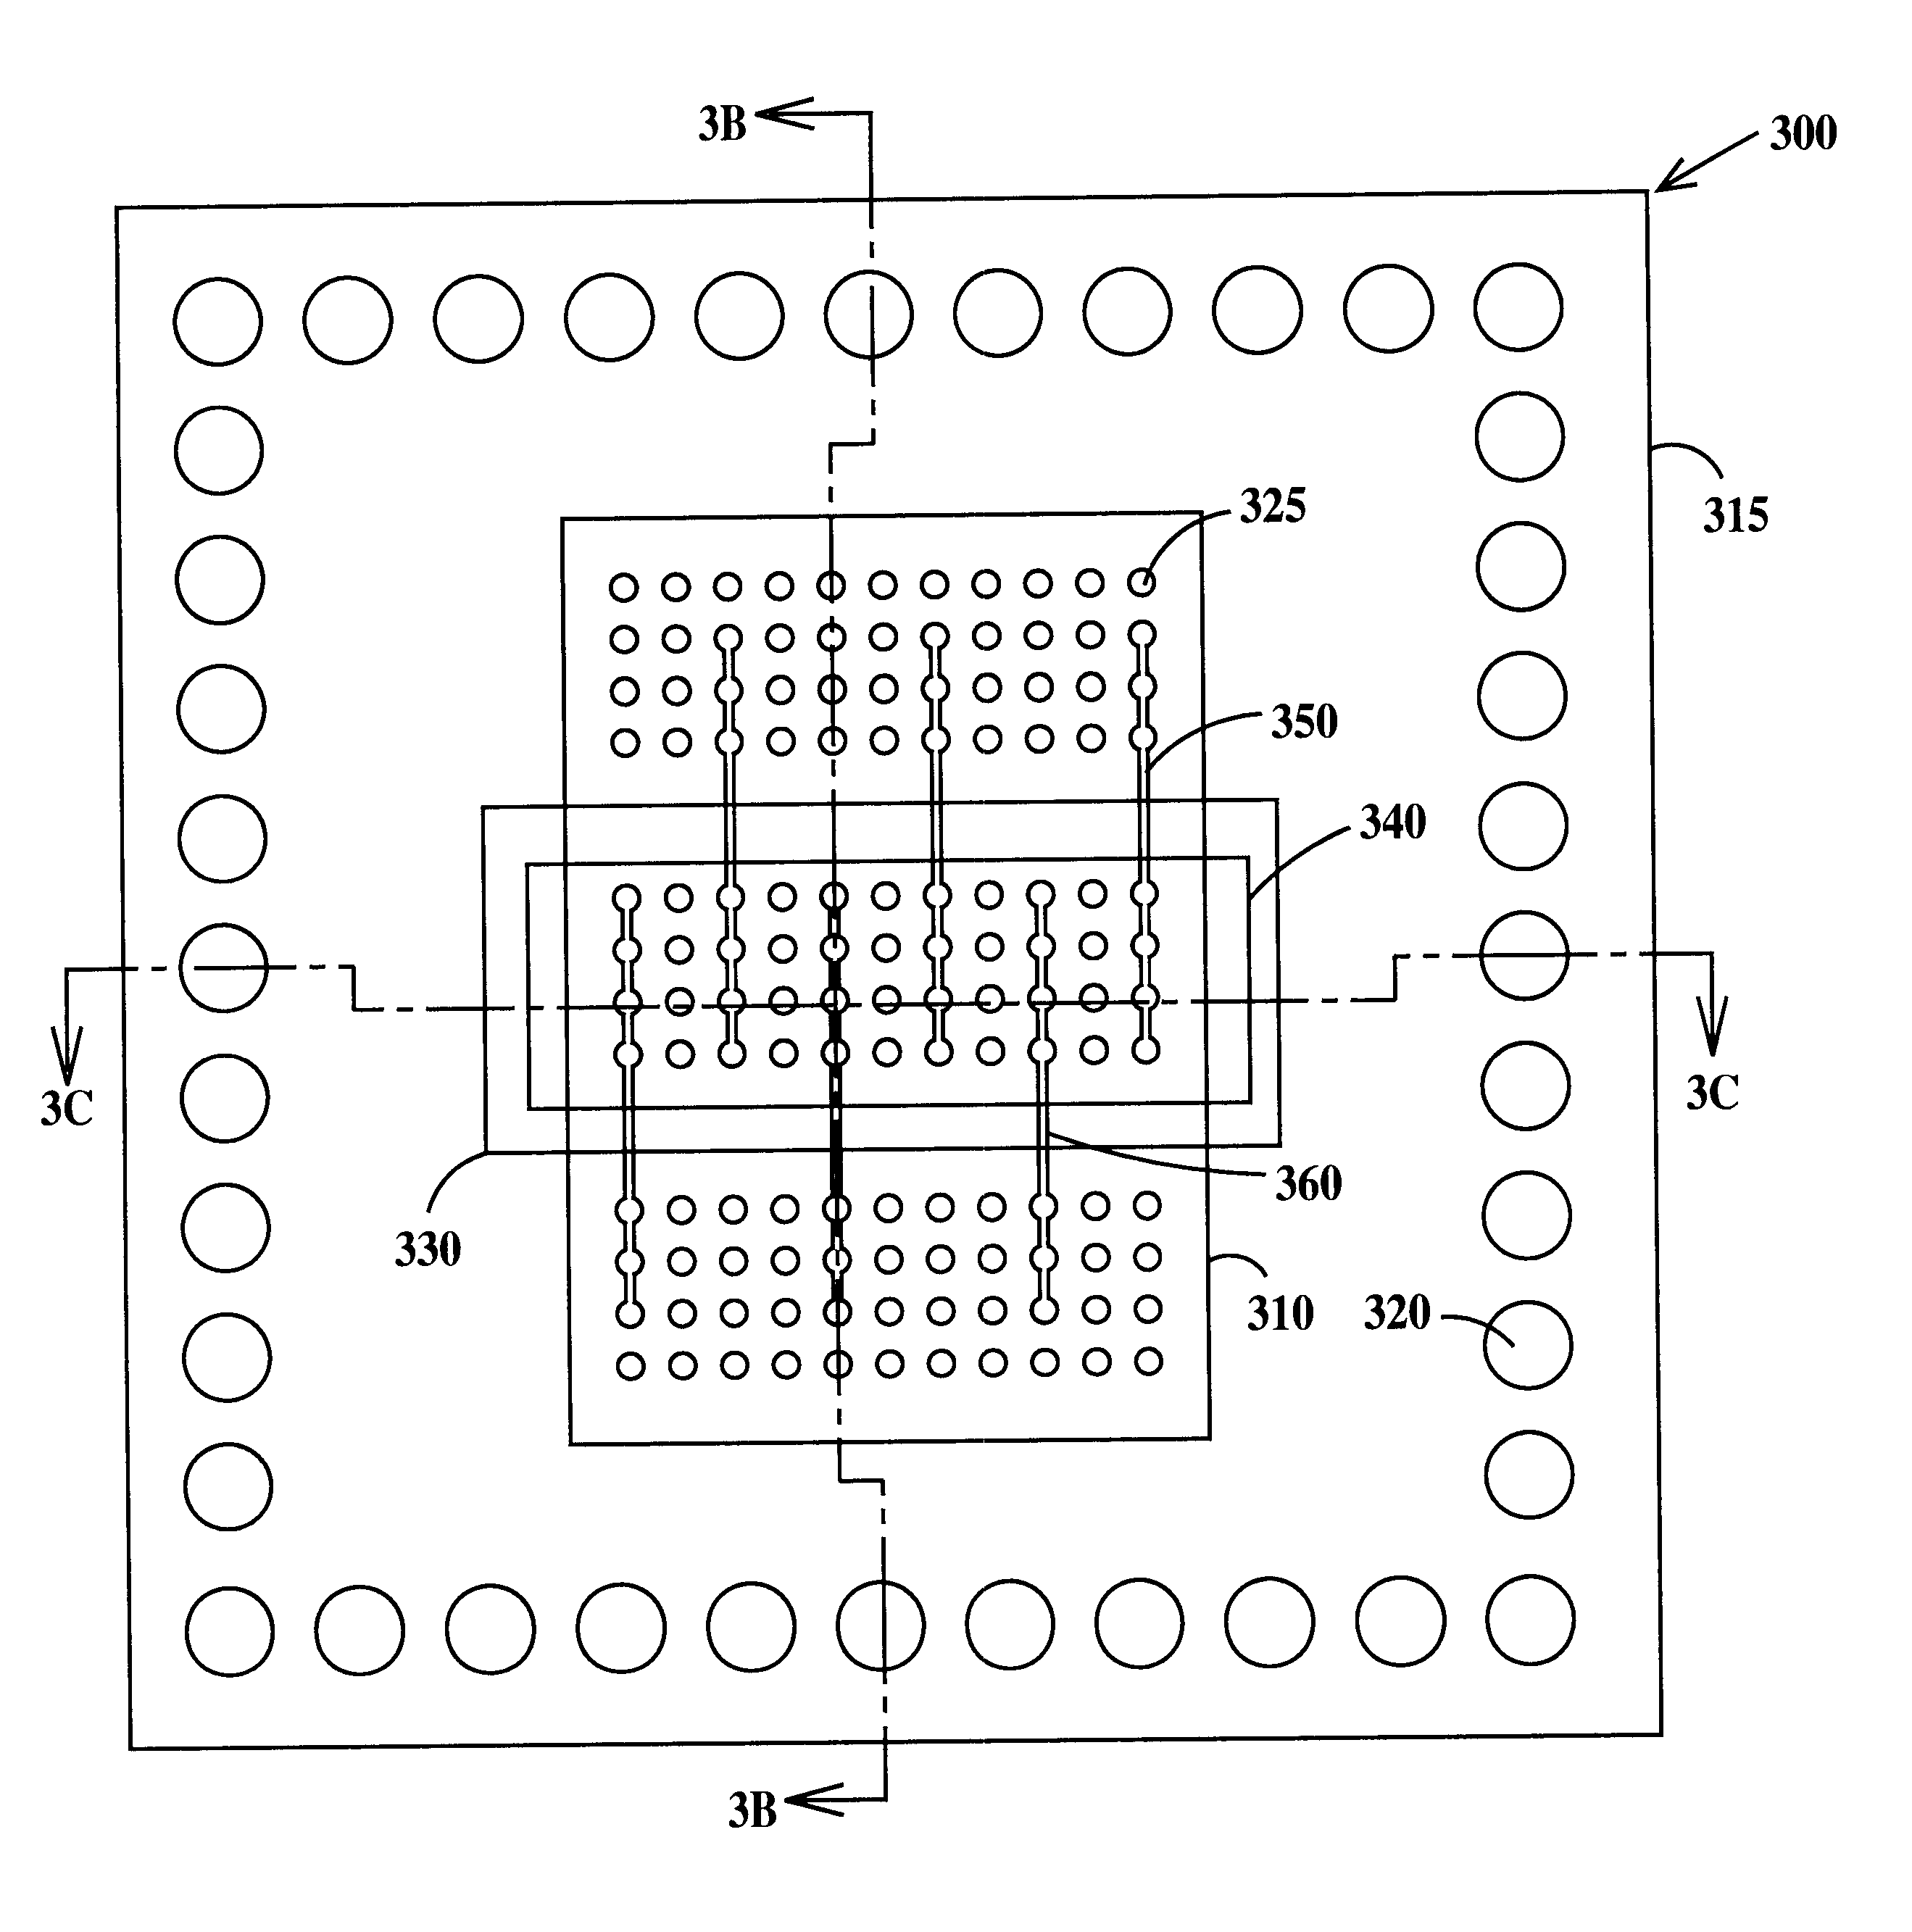 Low impedance power distribution structure for a semiconductor chip package